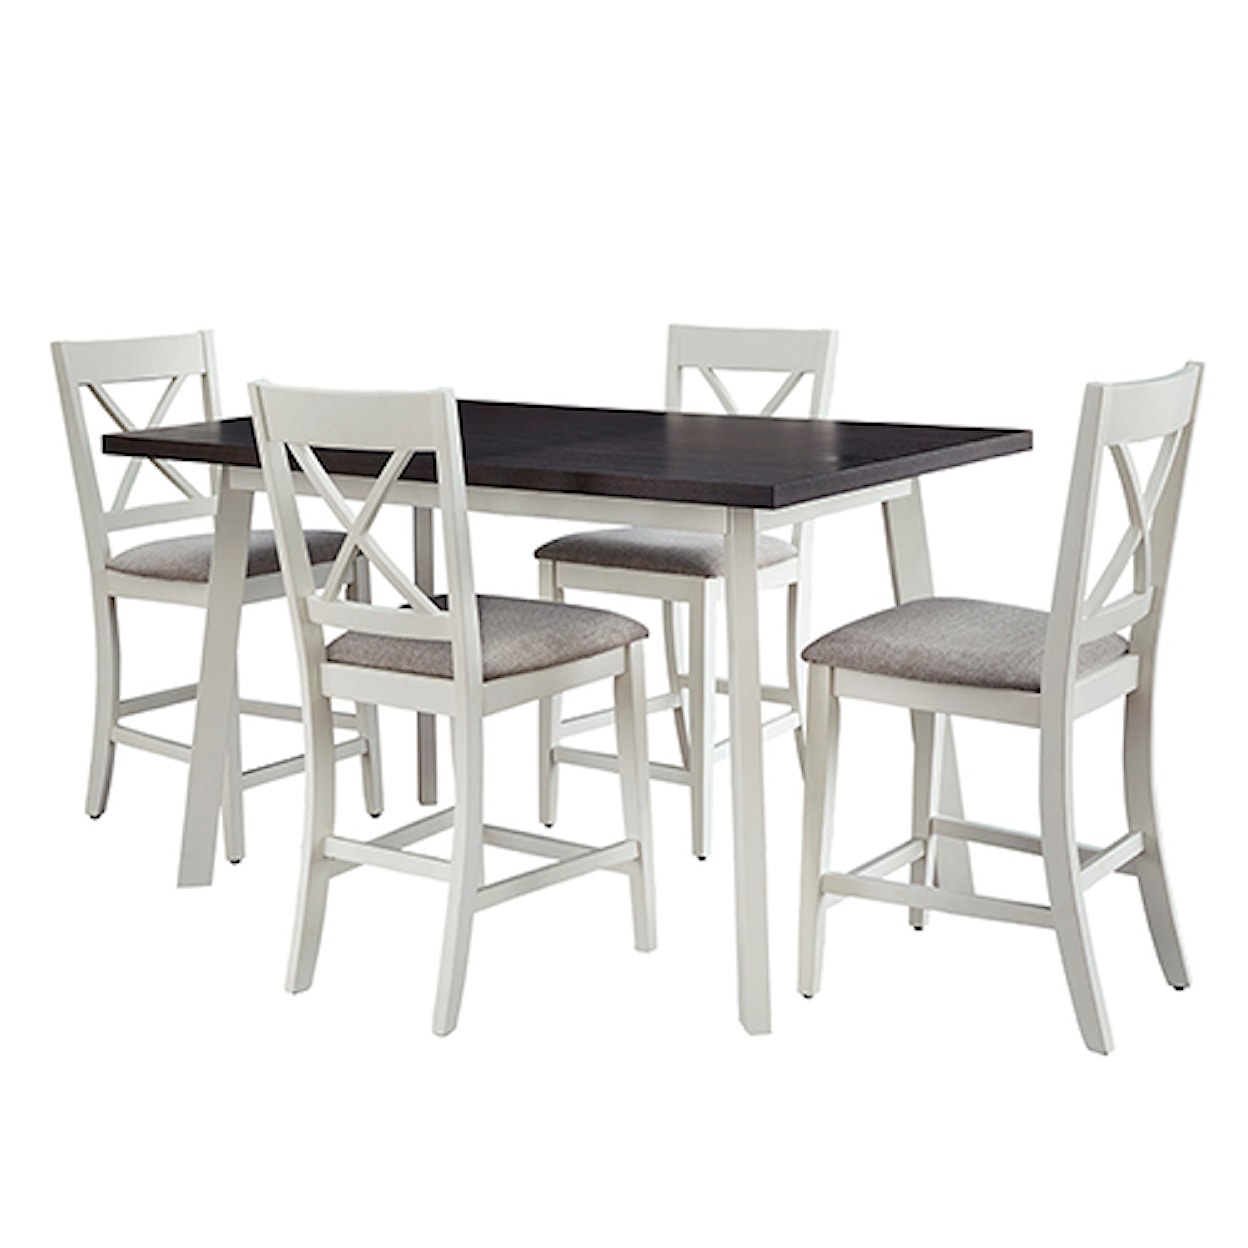 Progressive Furniture Salt & Pepper 5-Piece Counter-Height Table and Chair Set